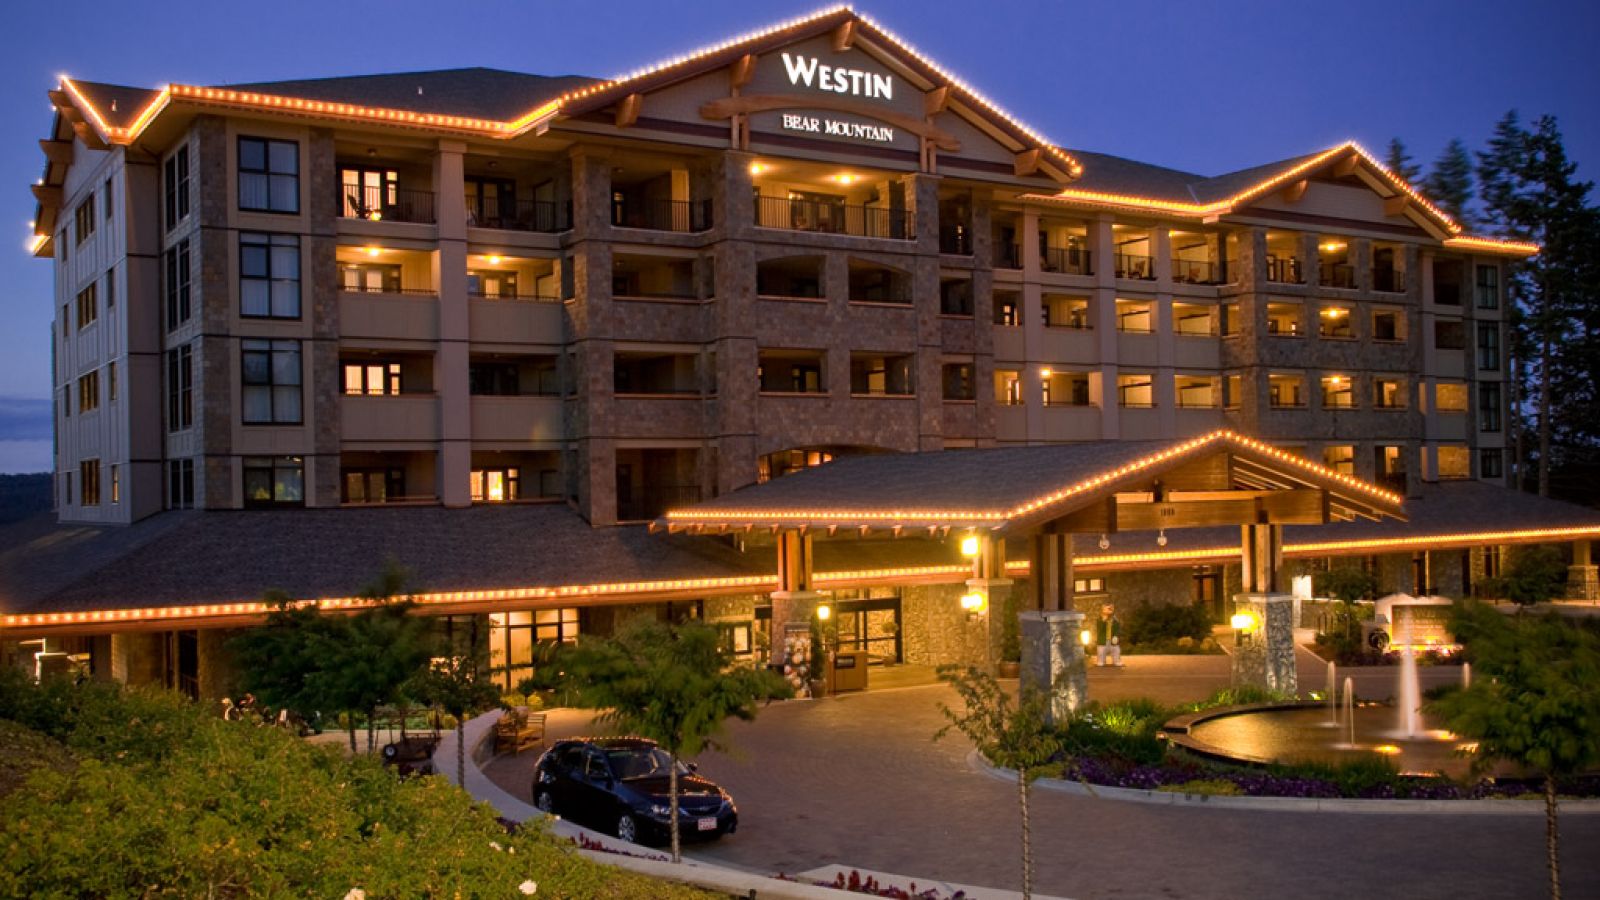 Westin Bear Mountain Resort - Vancouver Island golf packages